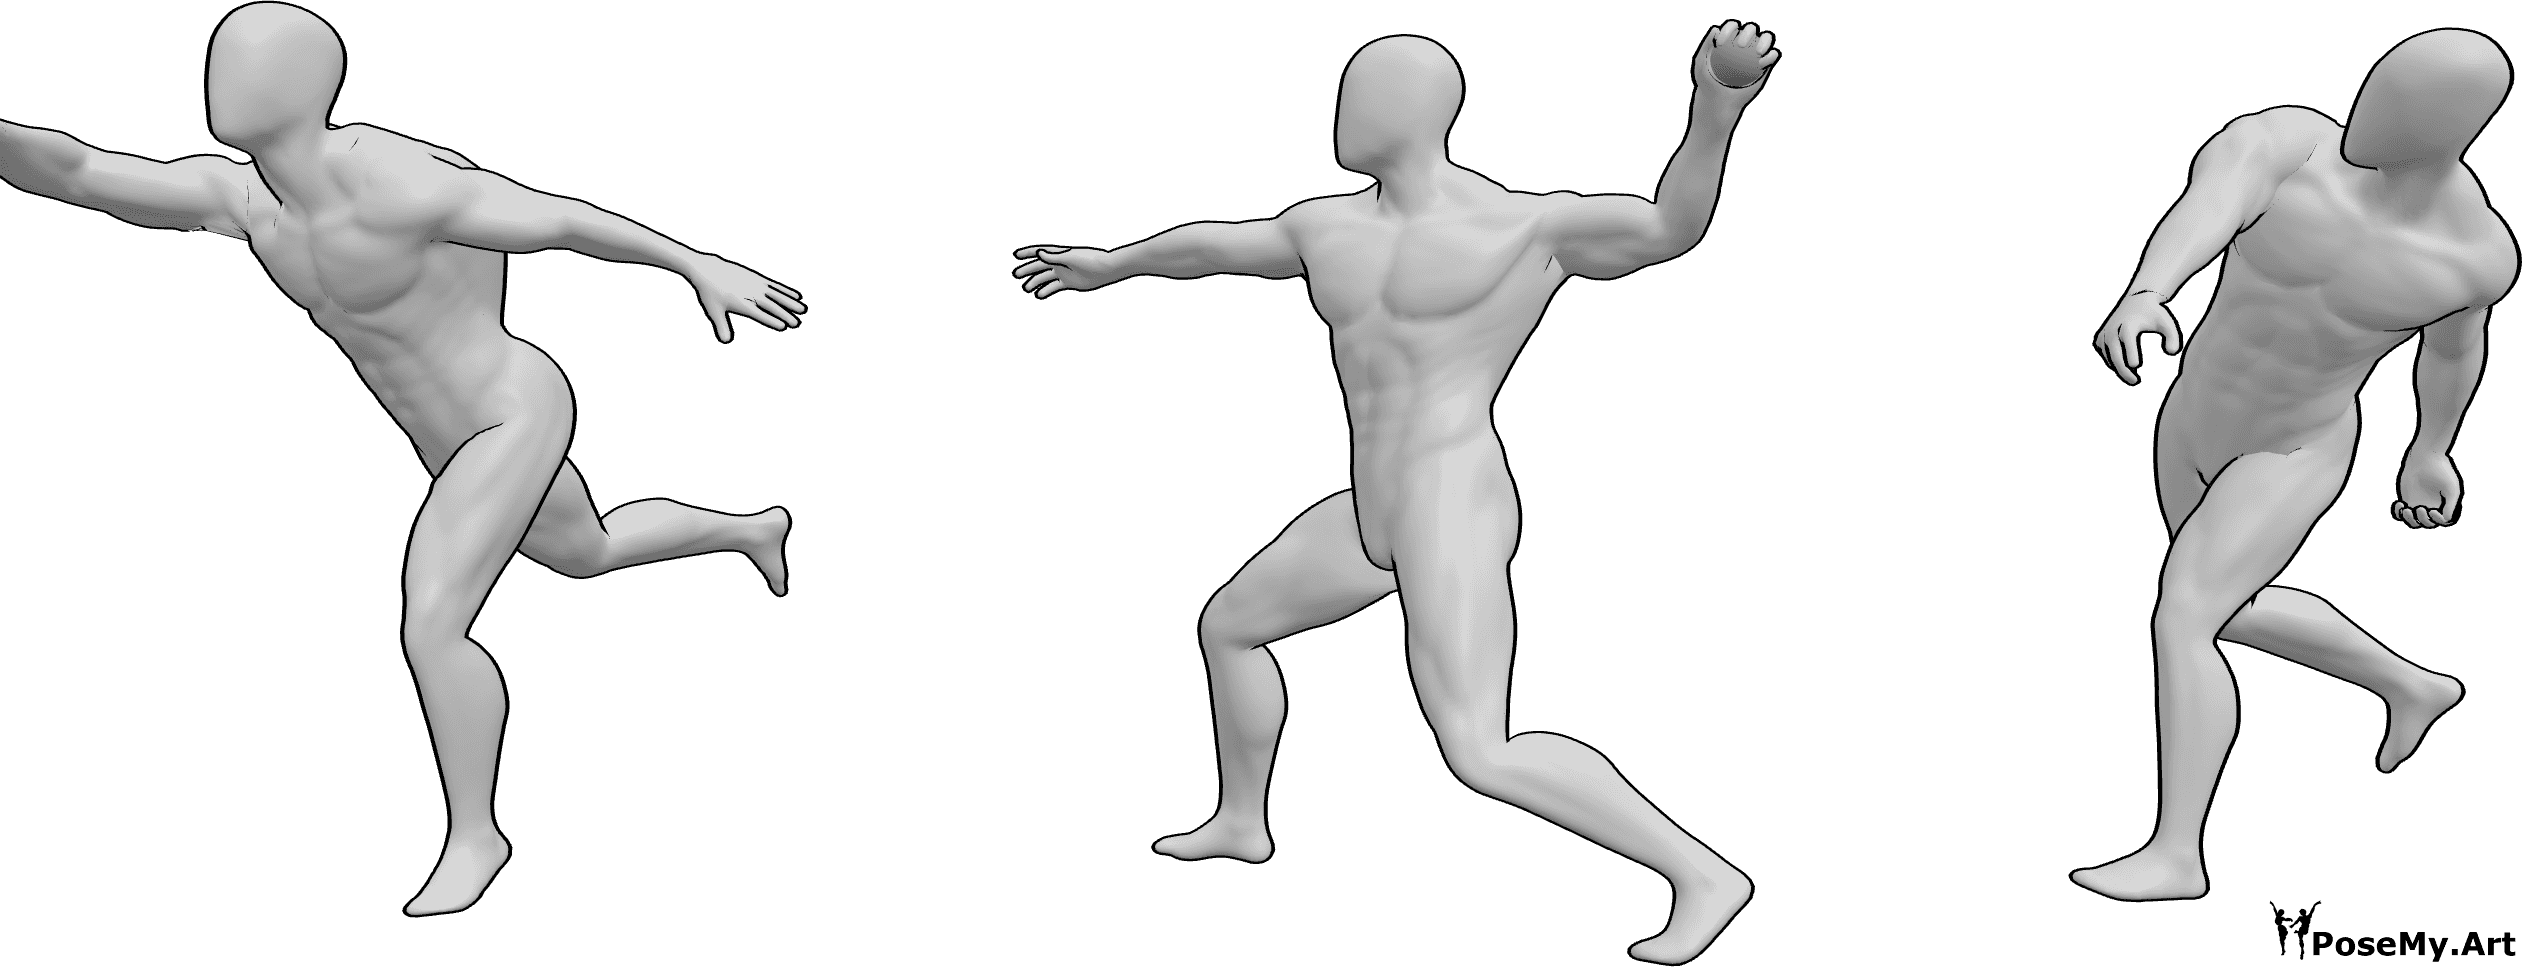 Pose Reference- Throwing Positions - Three realistic men models in different throwing positions